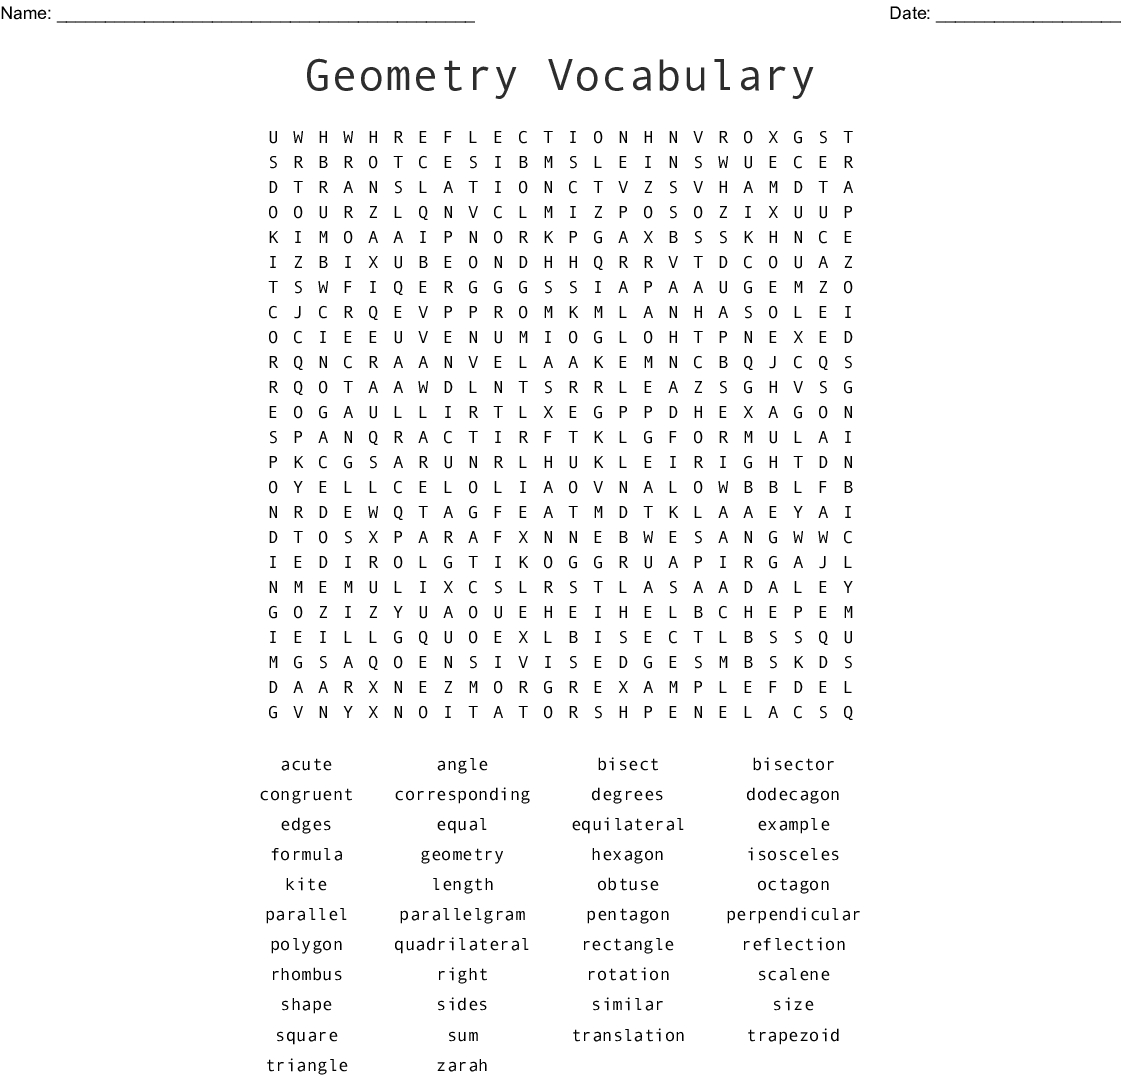 Geometry Vocabulary Word Search - Wordmint